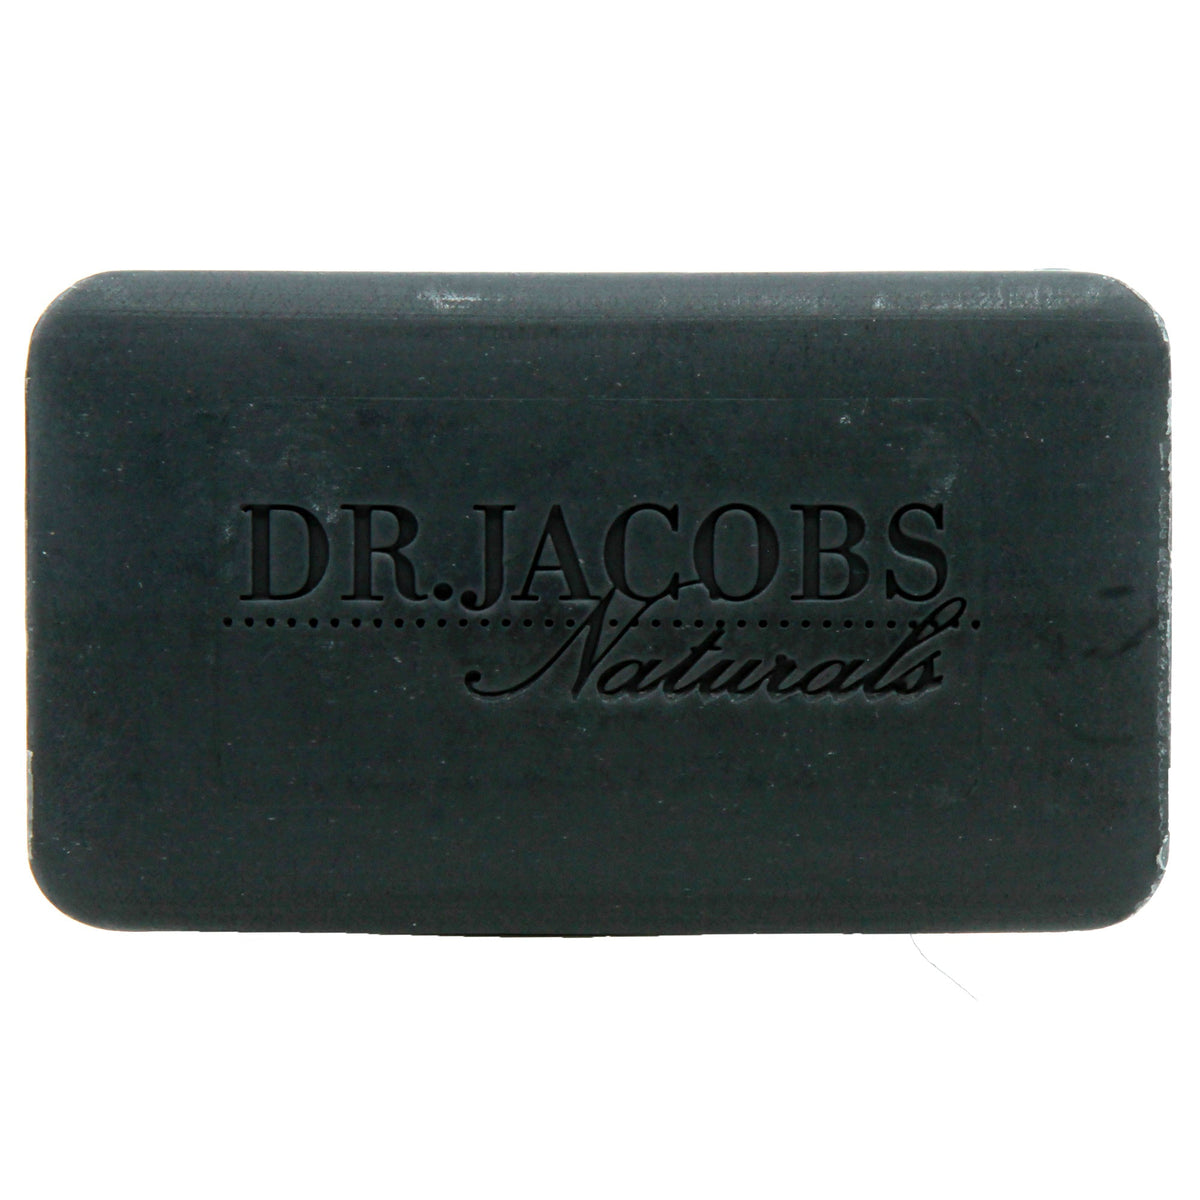 Muddy Charcoal by Dr. Jacobs Naturals